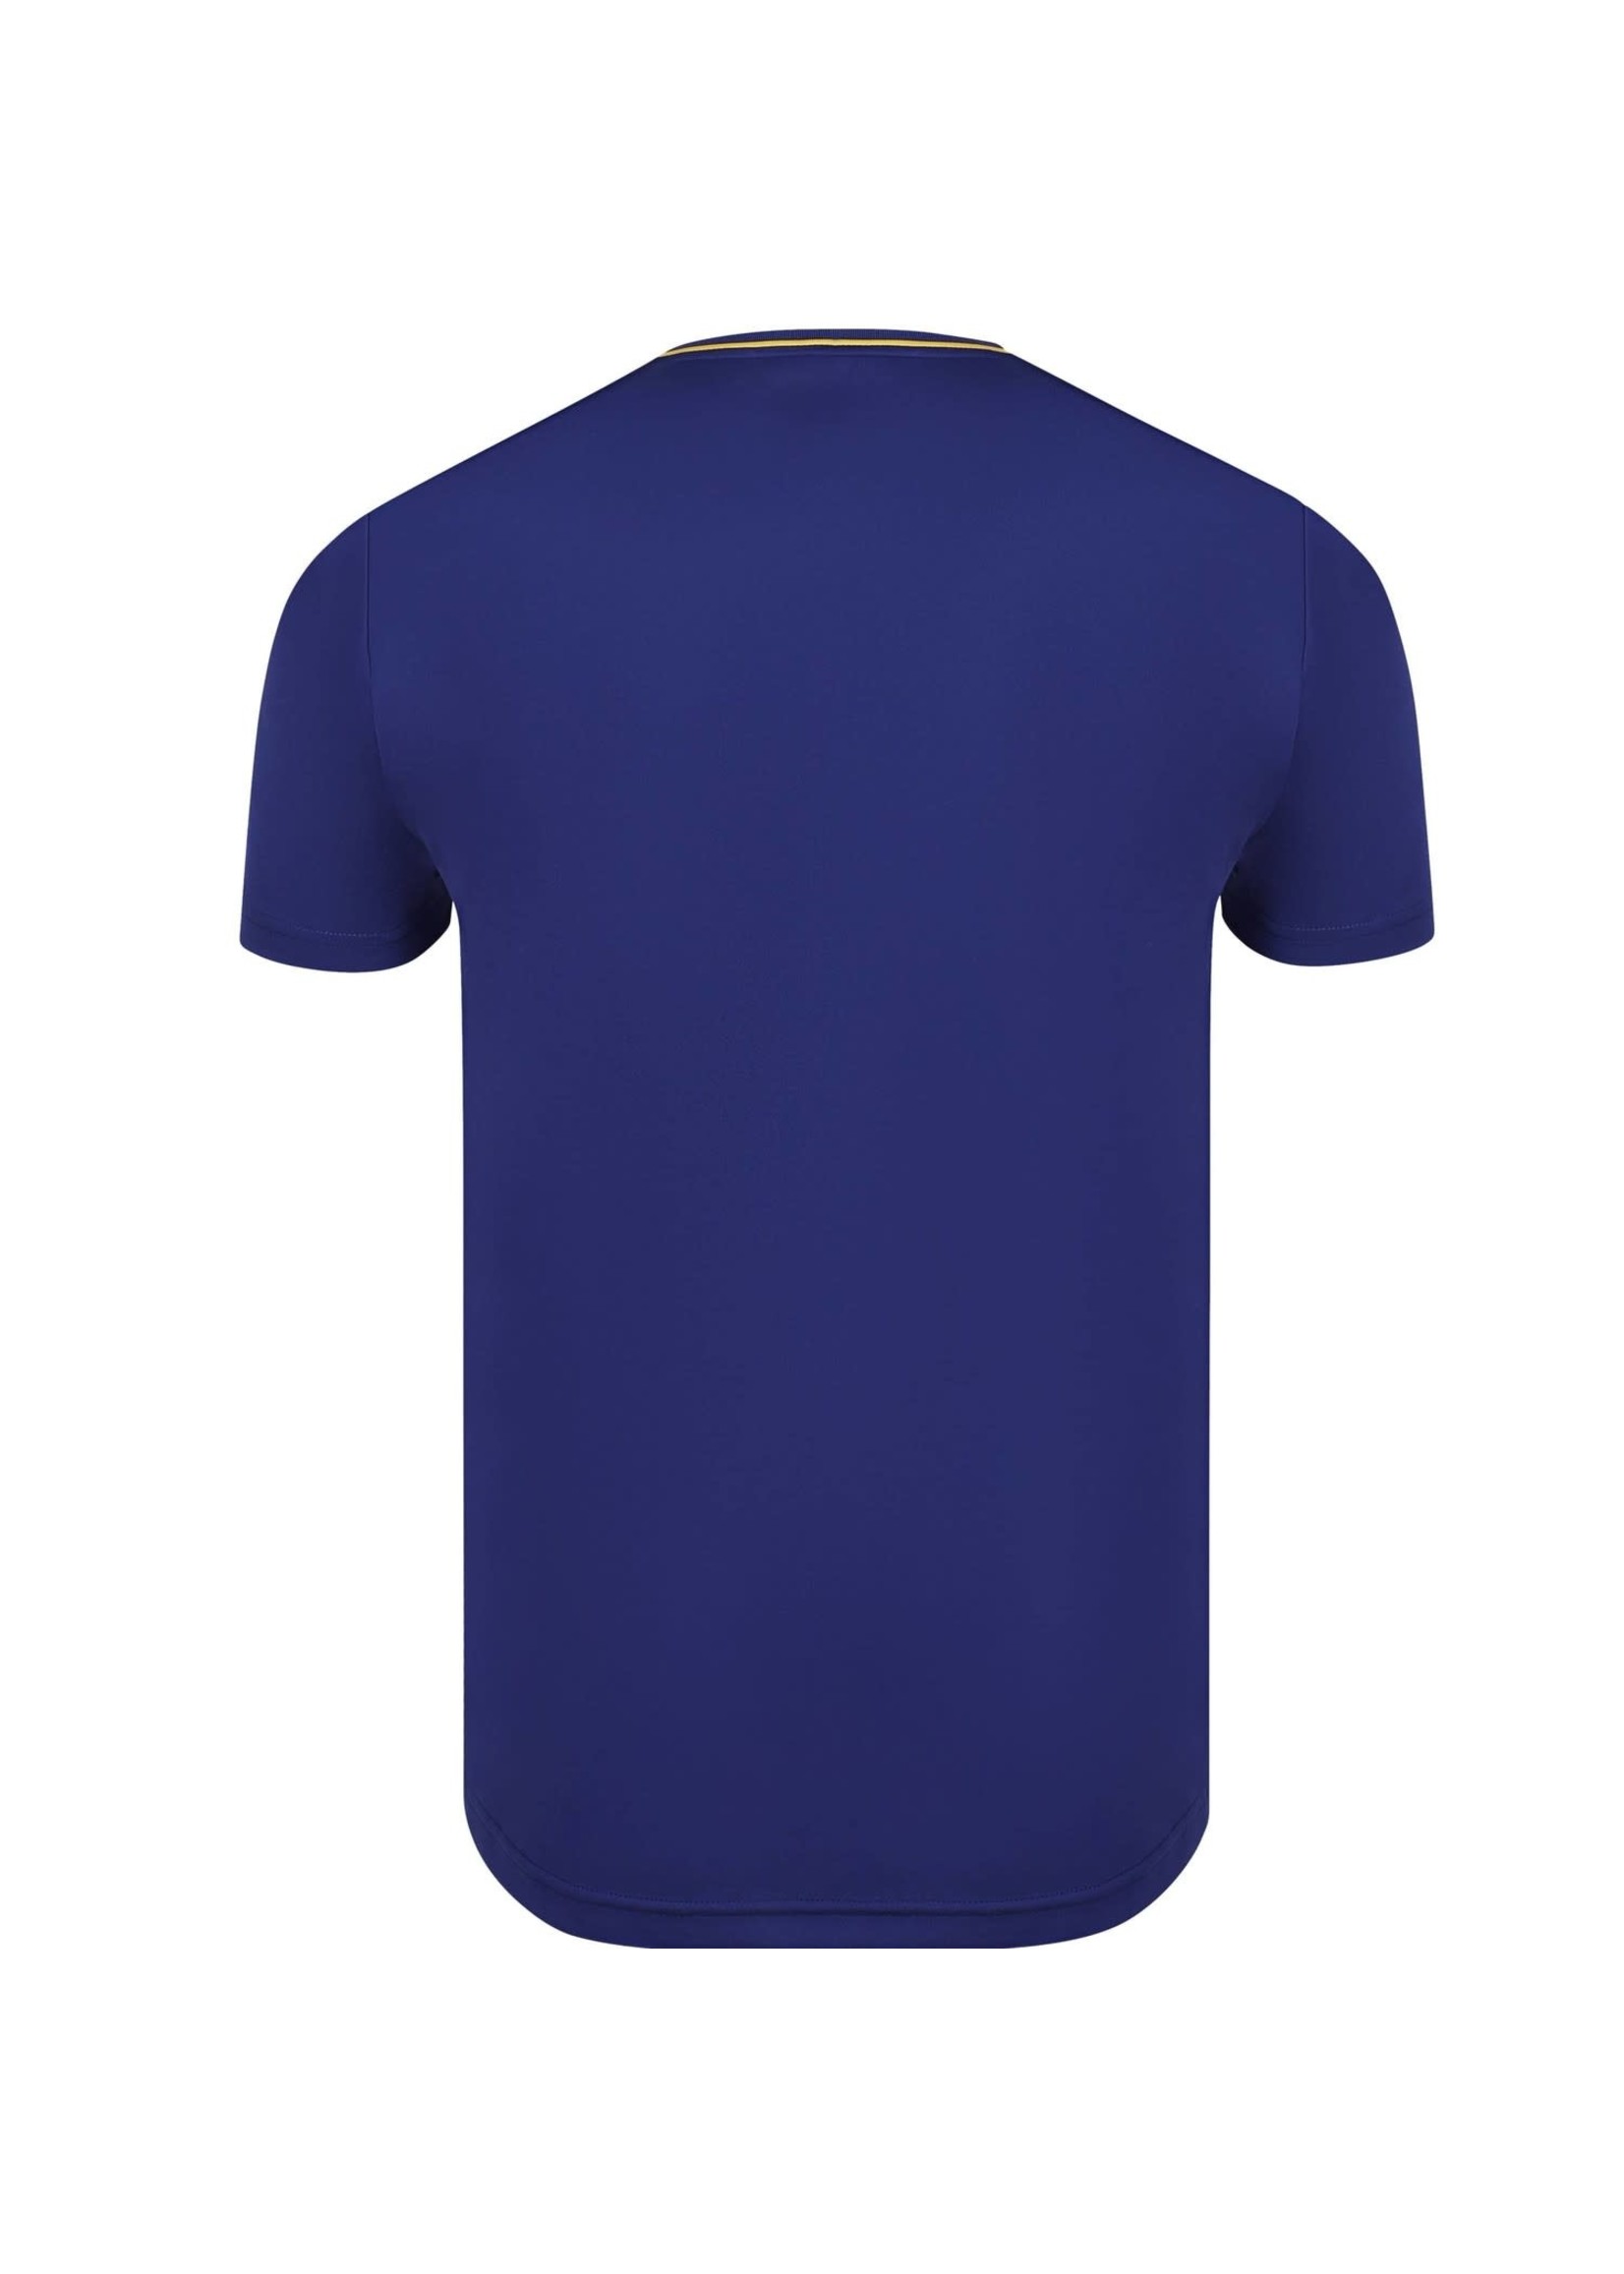 Victor Victor shirt T-14101